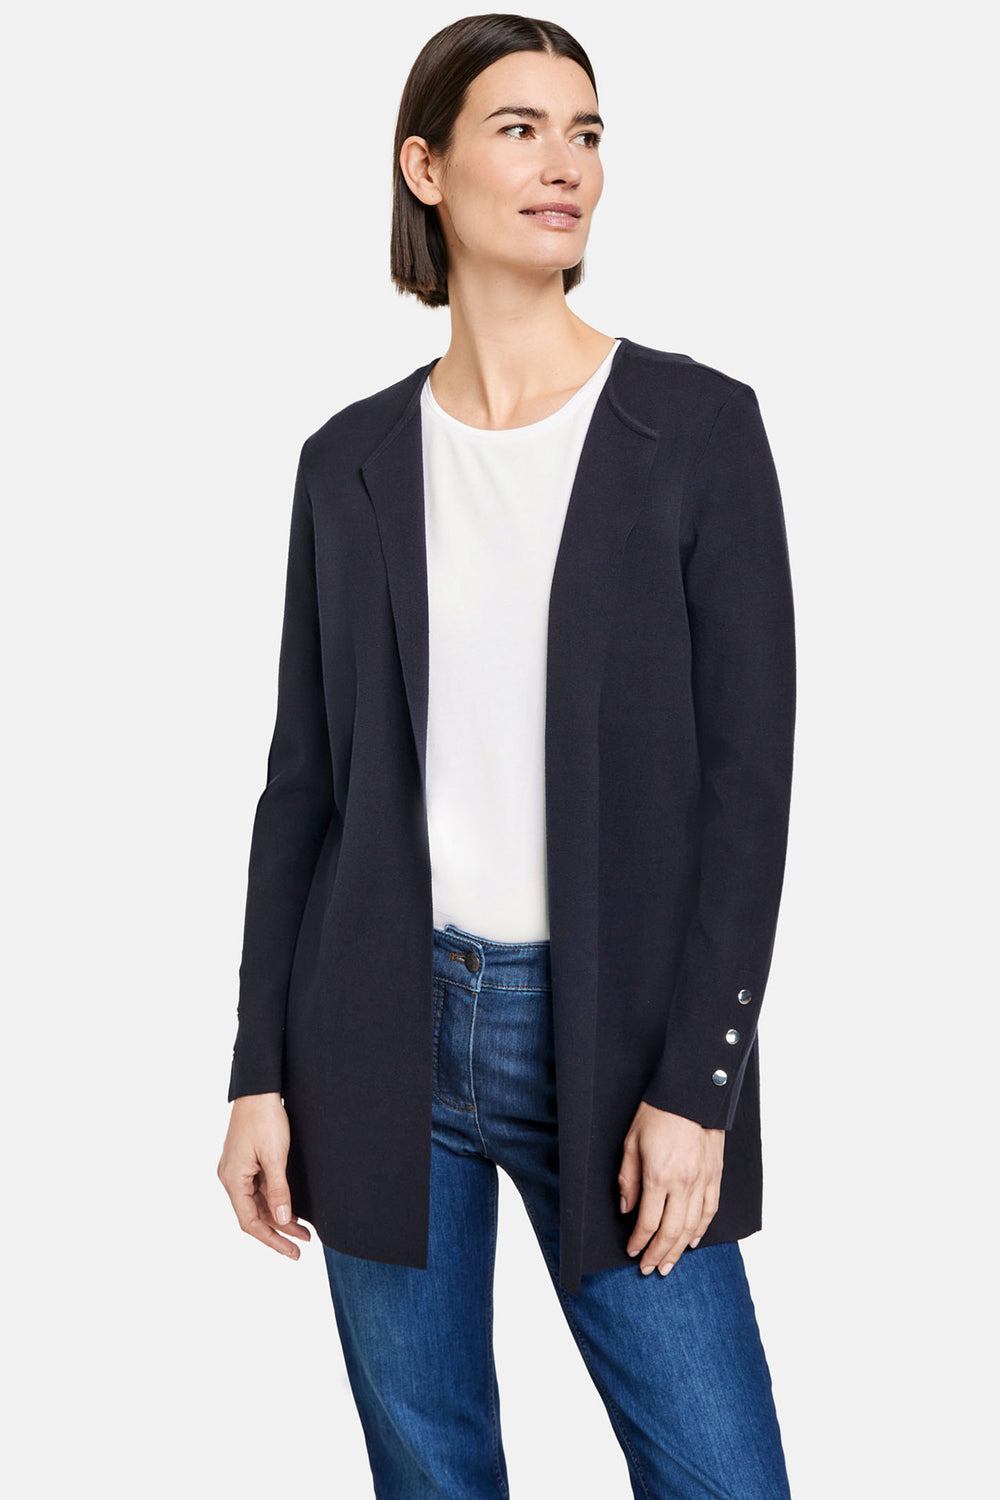 Gerry Weber 935032-44713 Navy Open Front Round Neck Cardigan - Dotique Chesterfield